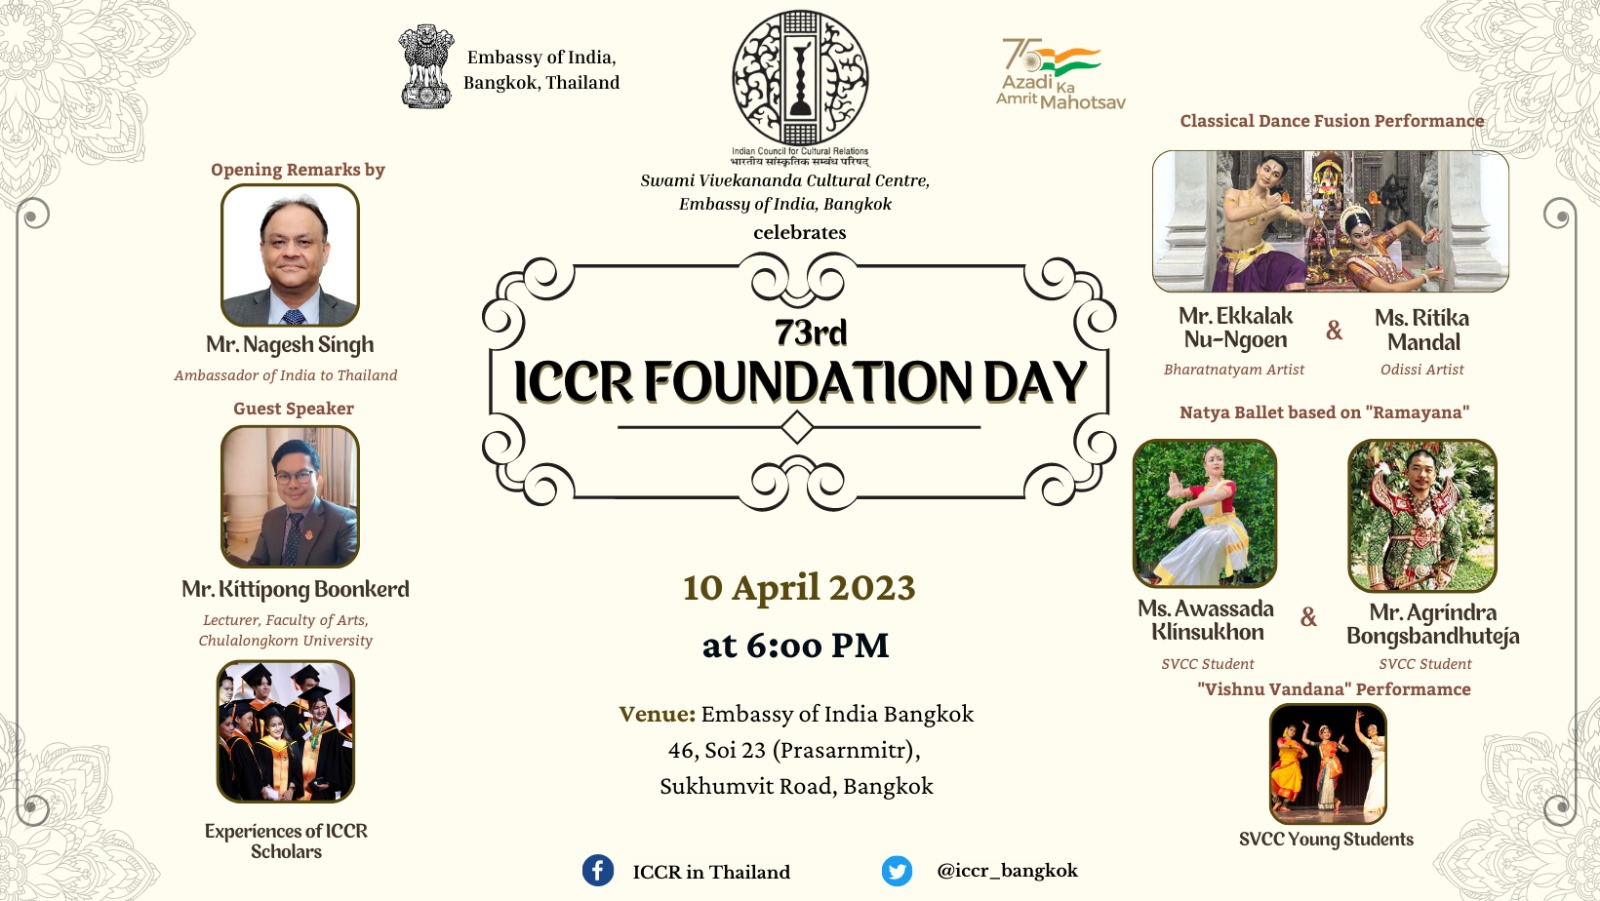 SVCC Embassy of India Bangkok celebrated the 73rd Anniversary of ICCR Foundation Day 2023 at the Embassy of India, Bangkok on 10 April 2023. 